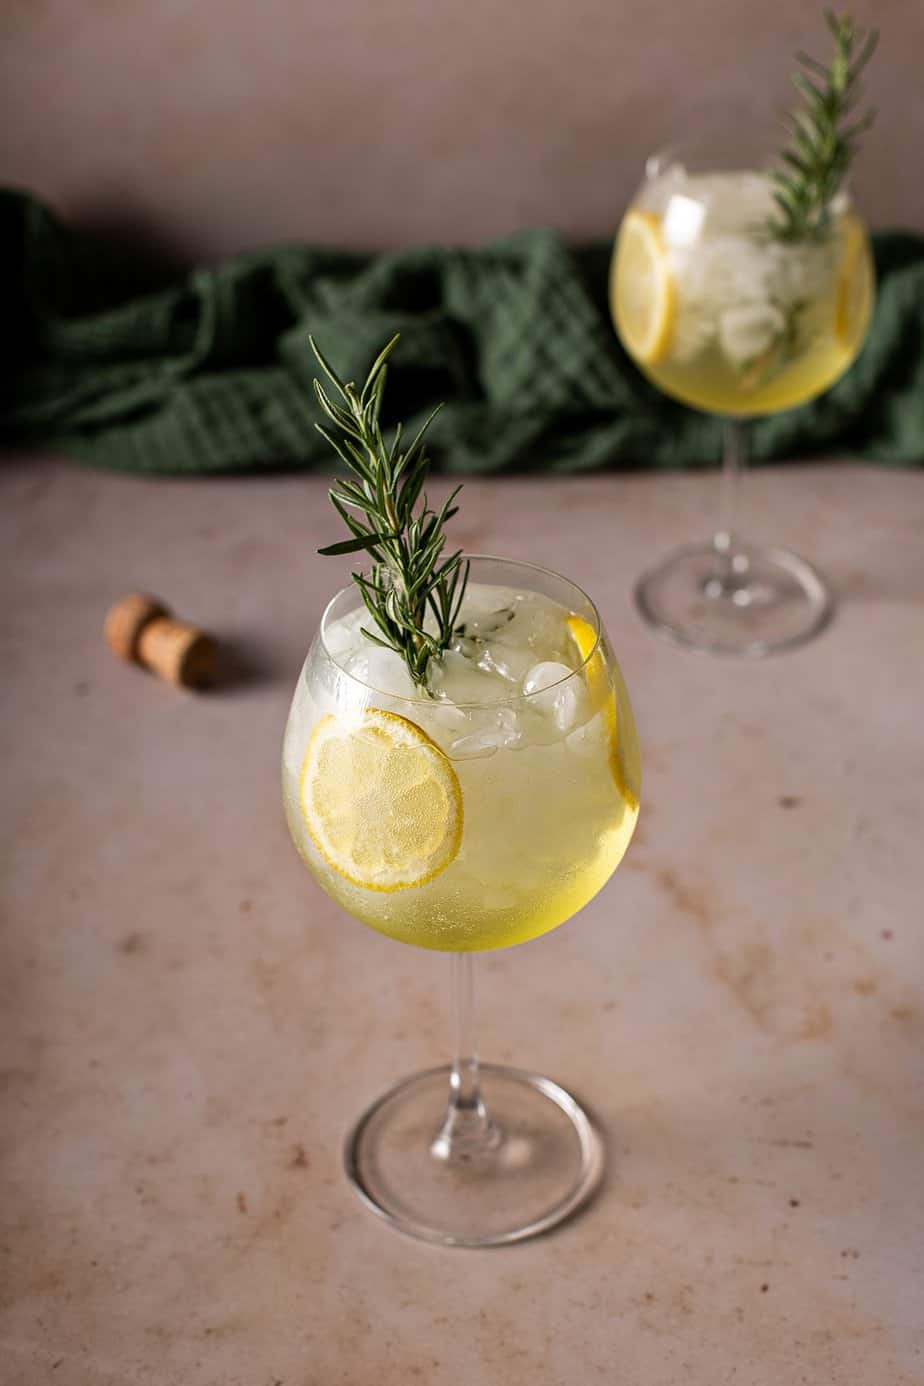 45 degree angle of 2 limoncello spritz cocktails